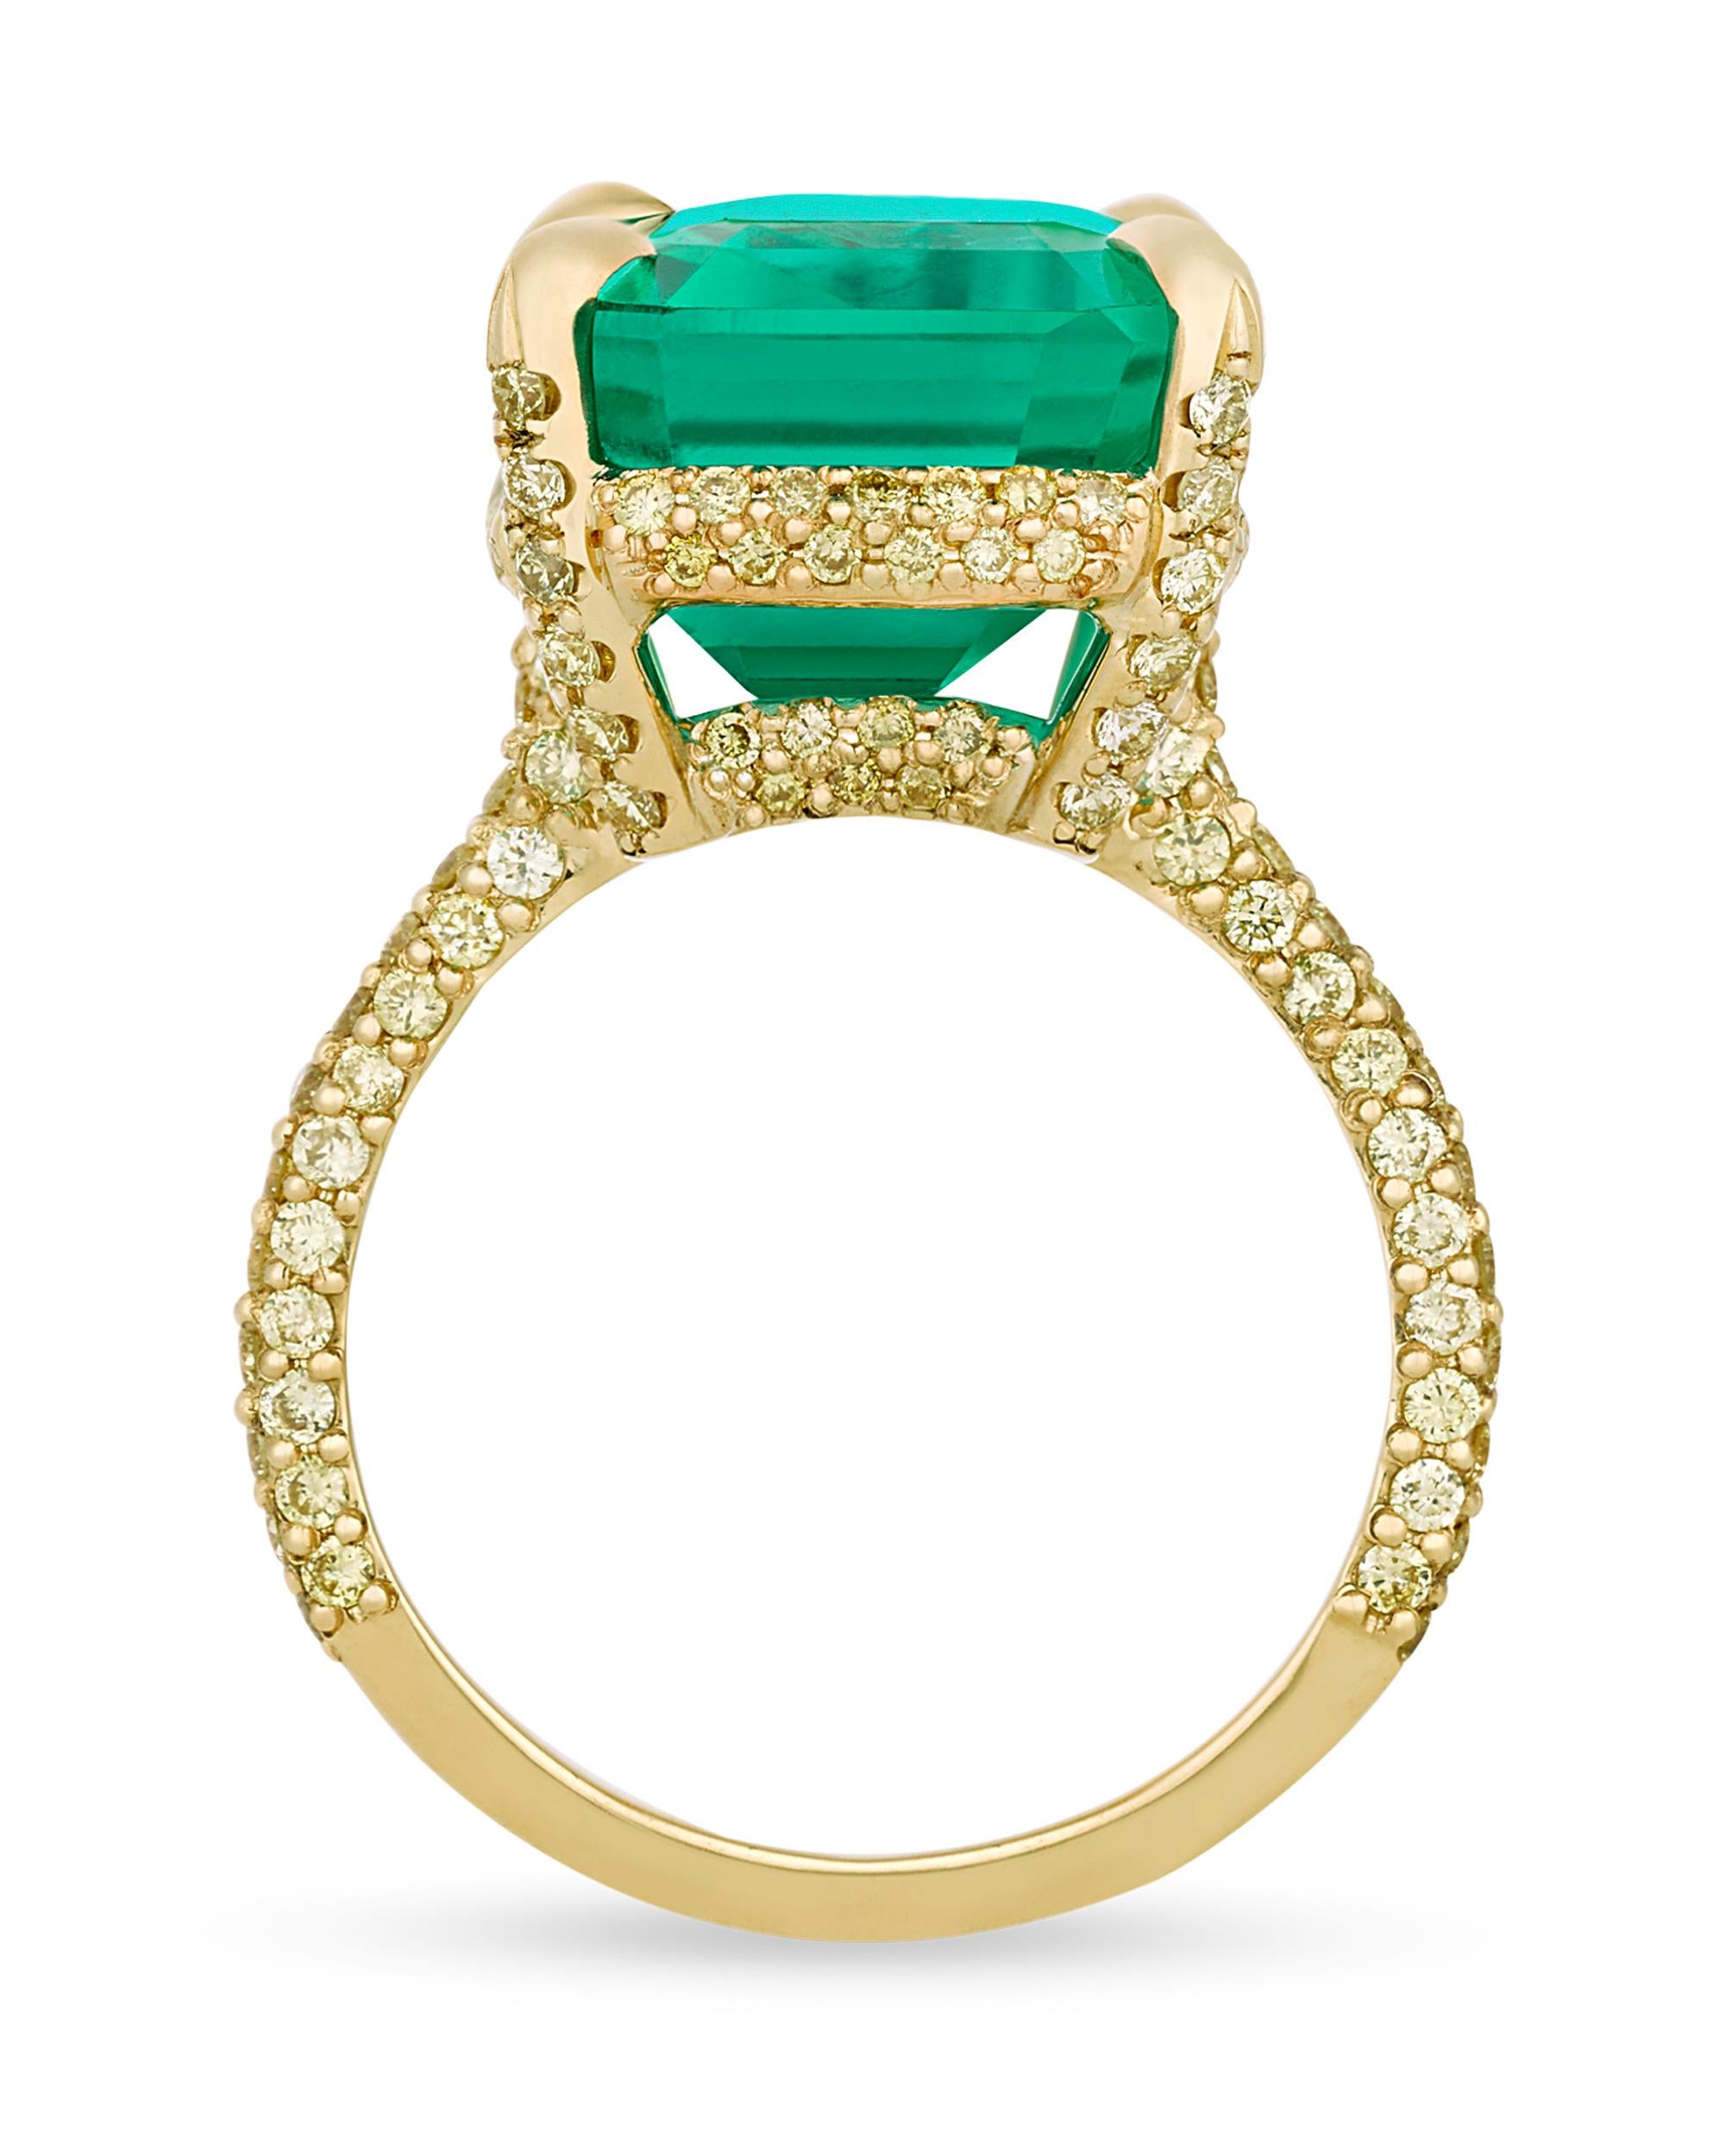 An extraordinary emerald-cut Colombian emerald displays an incredible depth of color and brilliance in this eye-catching ring. Possessing the “Old Mine” green hue that makes Colombian emeralds so desirable, the 13.67-carat gem is perfectly